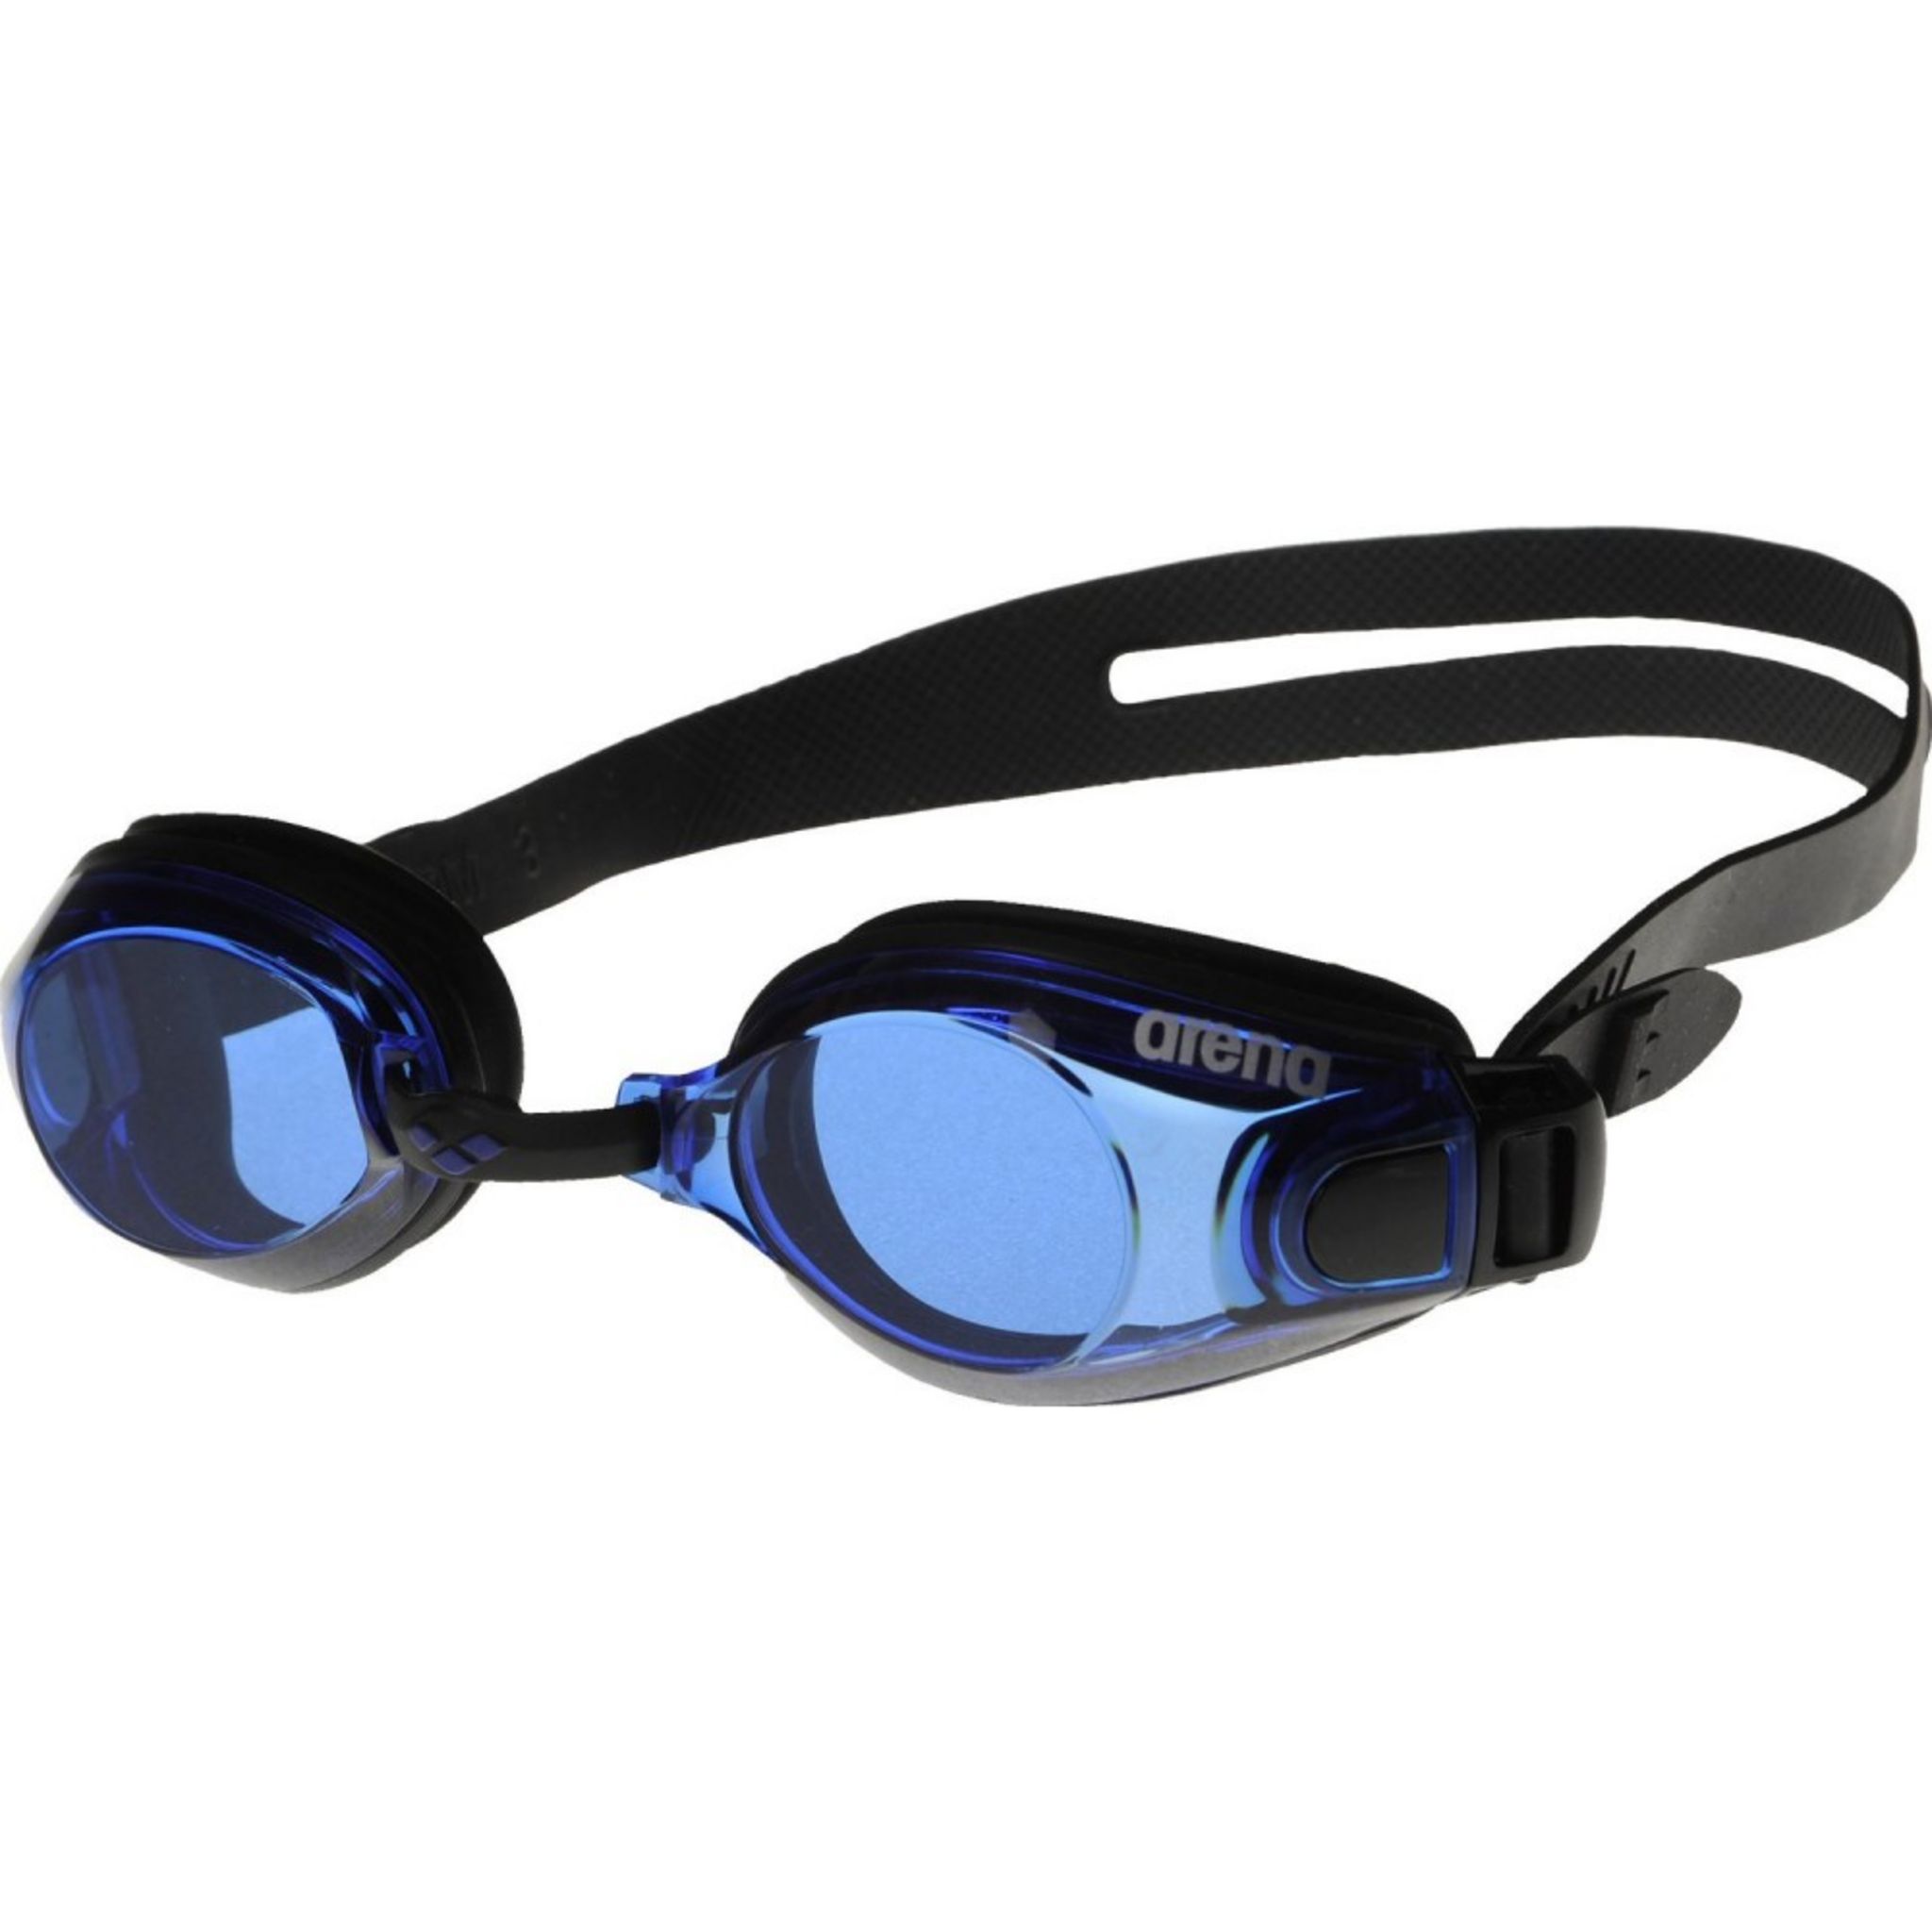 ARENA ZOOM X-FIT BBB - Lunettes Natation Homme/Femme Arena pas